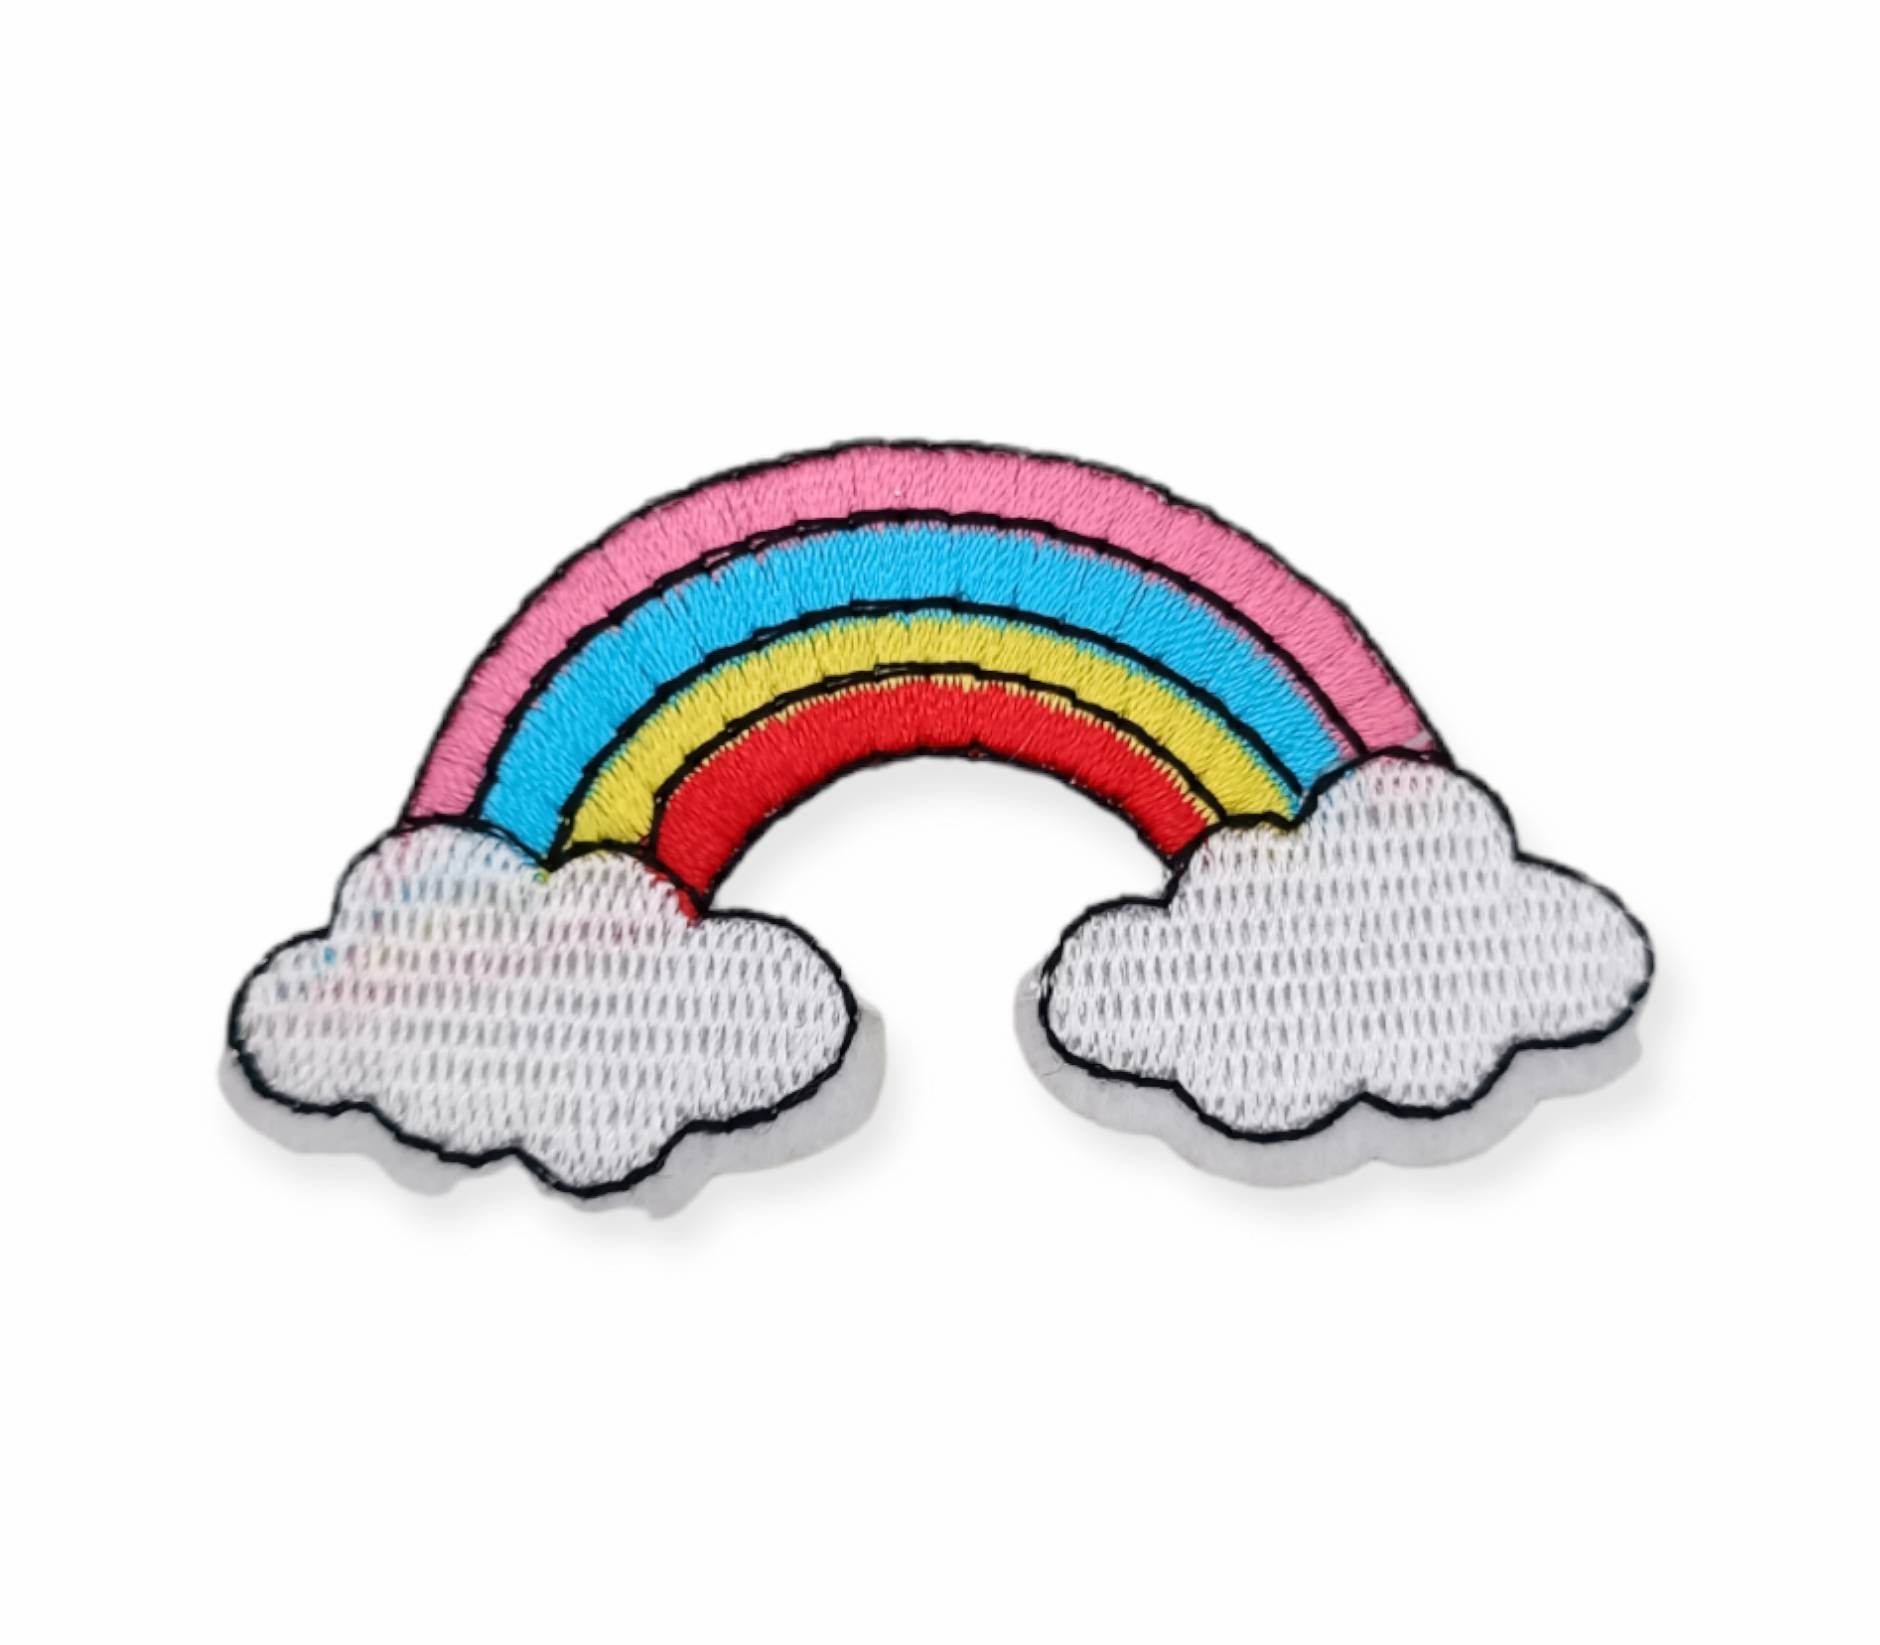 Iron on Patches | Patches for Hats and Clothes Rainbow Tree PHC008-007